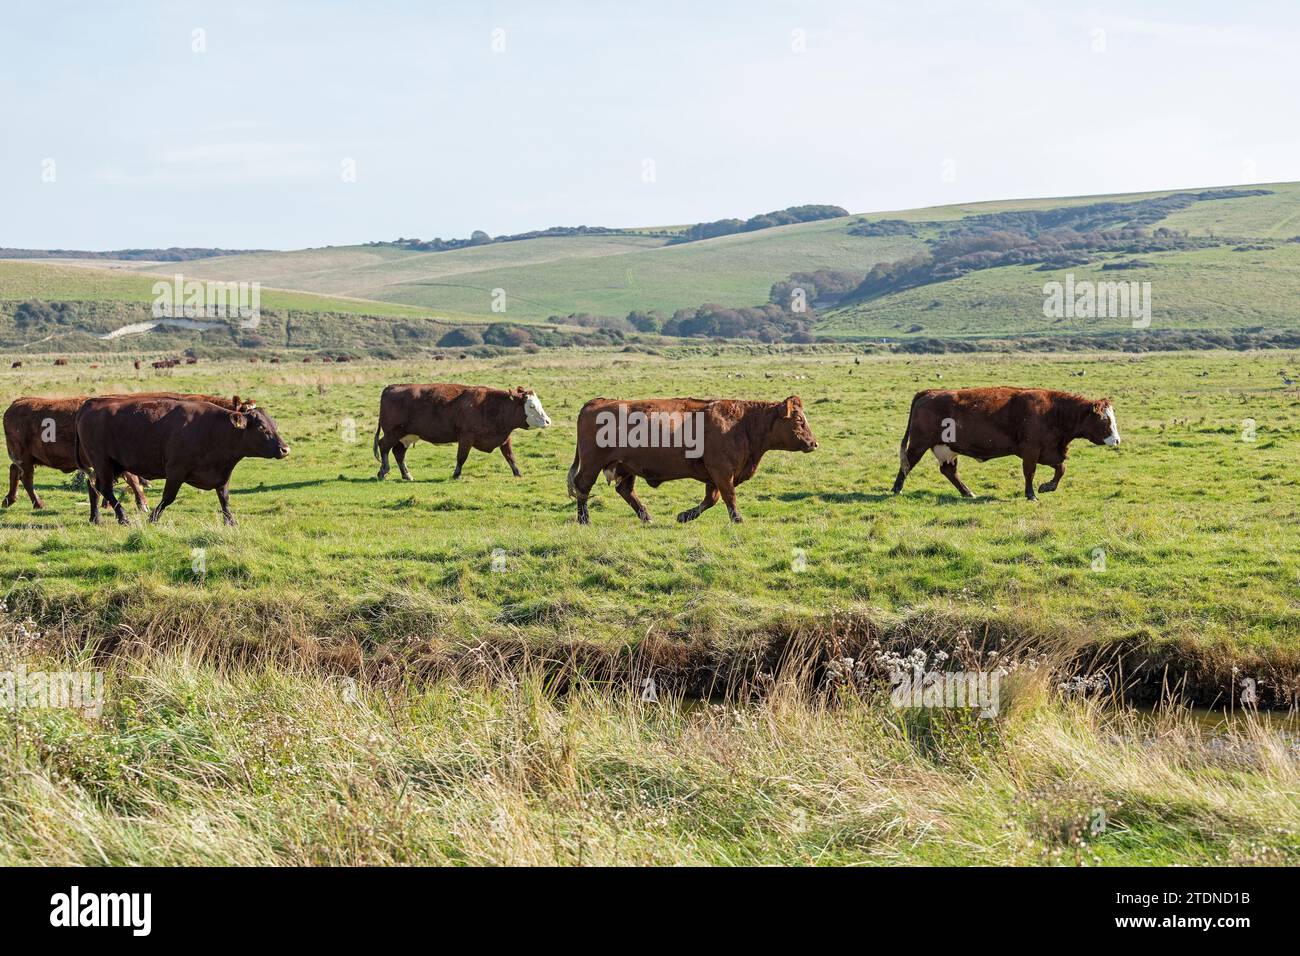 Cattle on a field near Cuckmere Haven, Seven Sisters, East Sussex, England, Great Britain Stock Photo